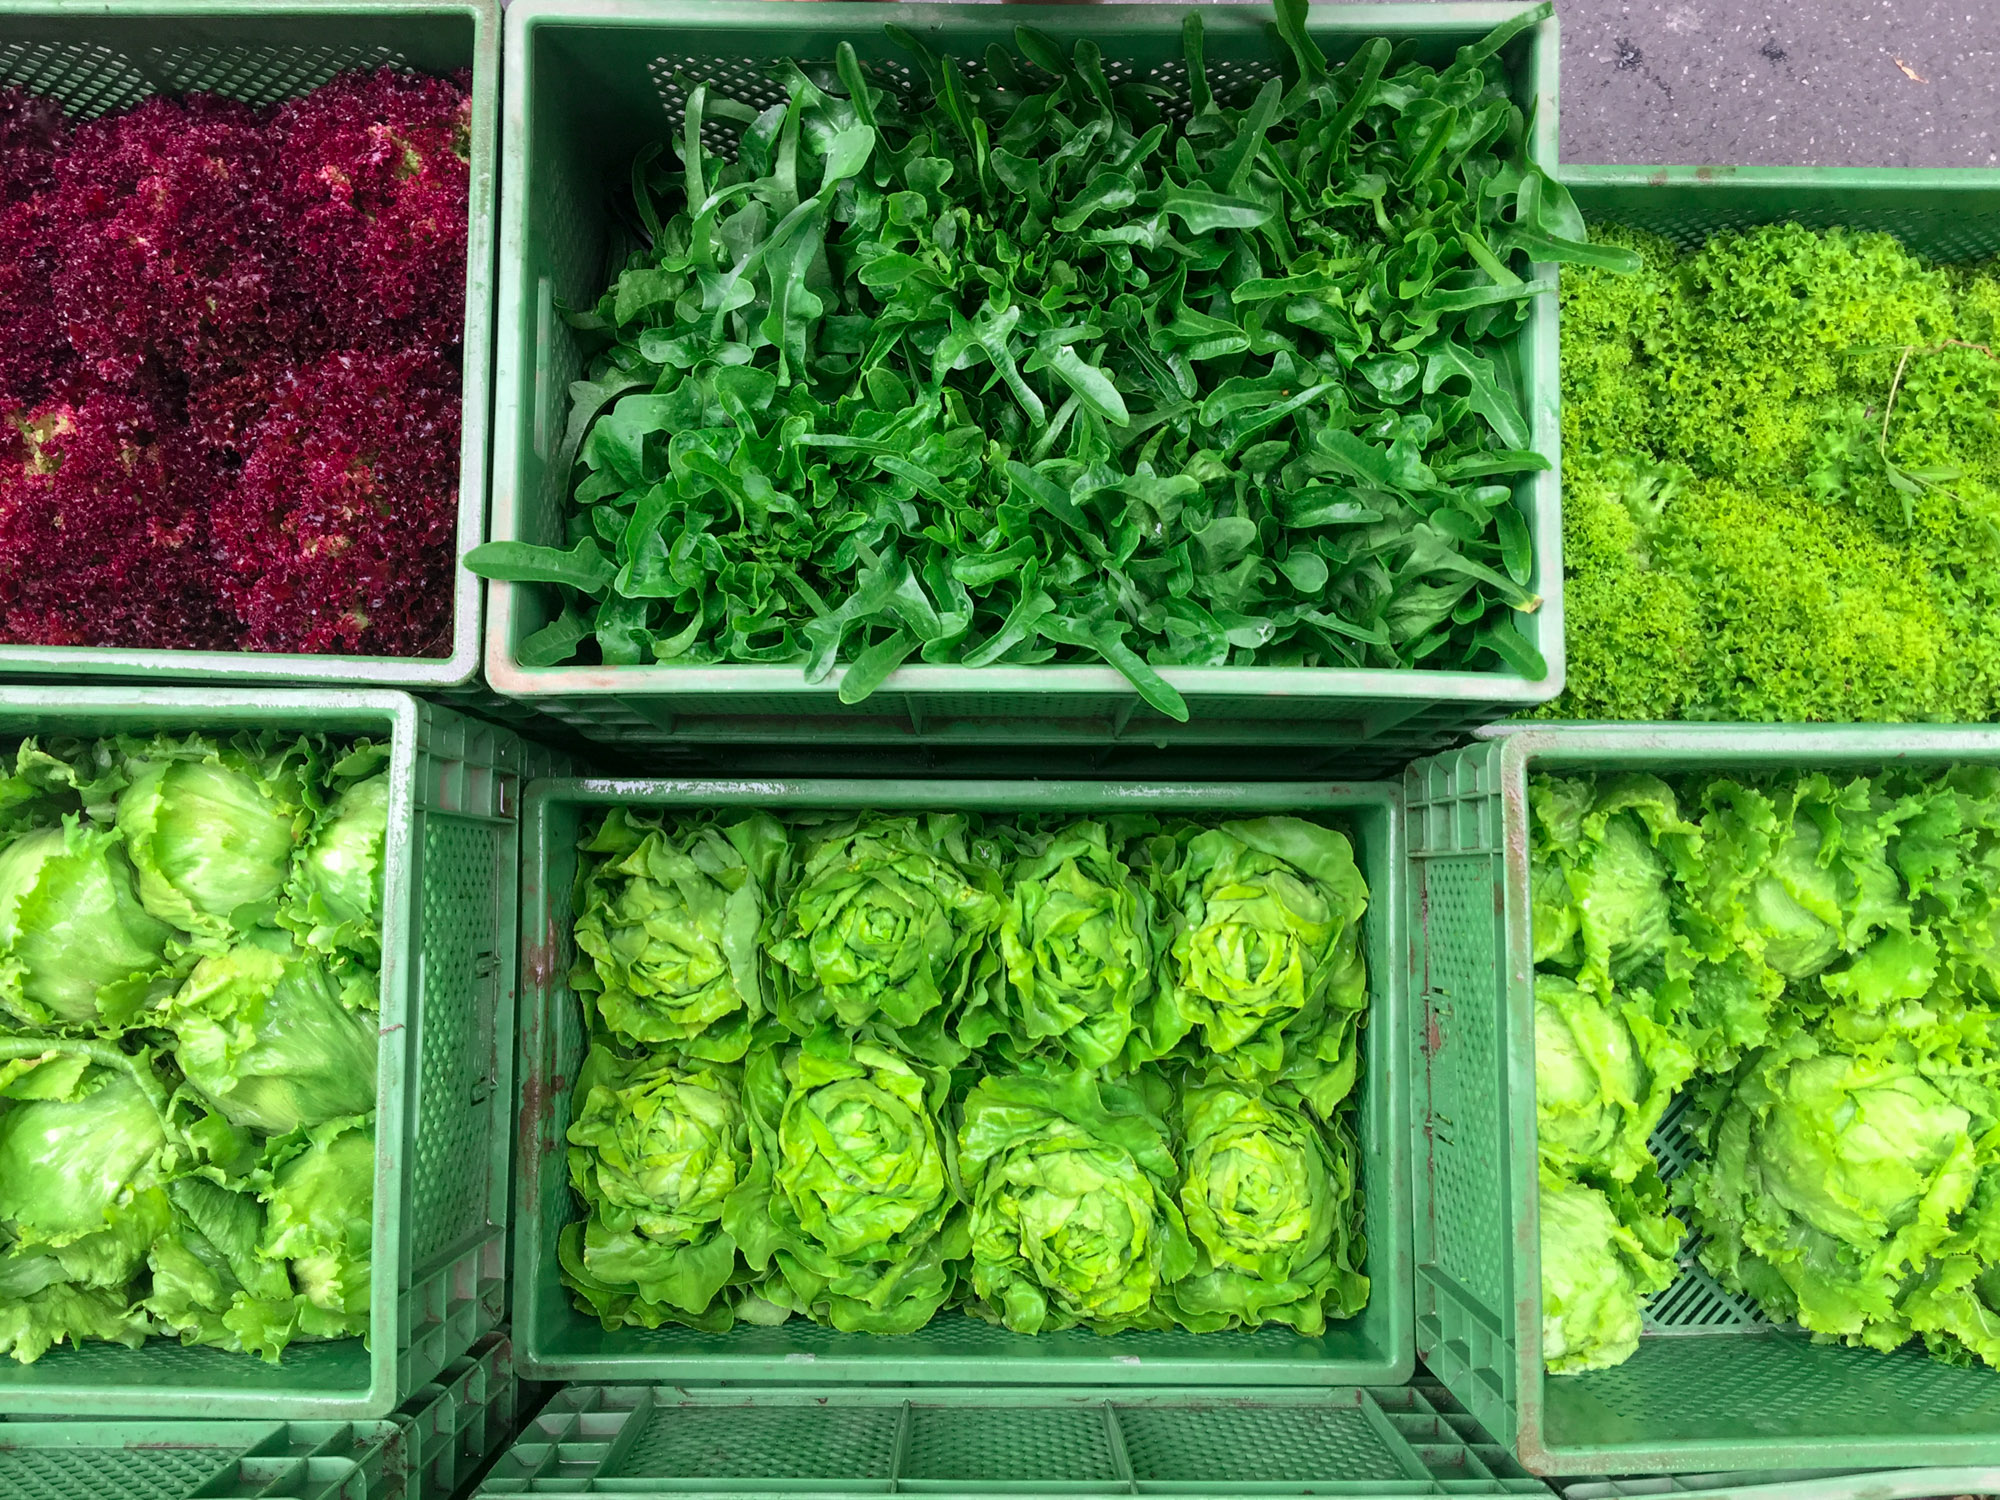 Leafy greens for raw vegan recipes. Storage and shopping hacks.